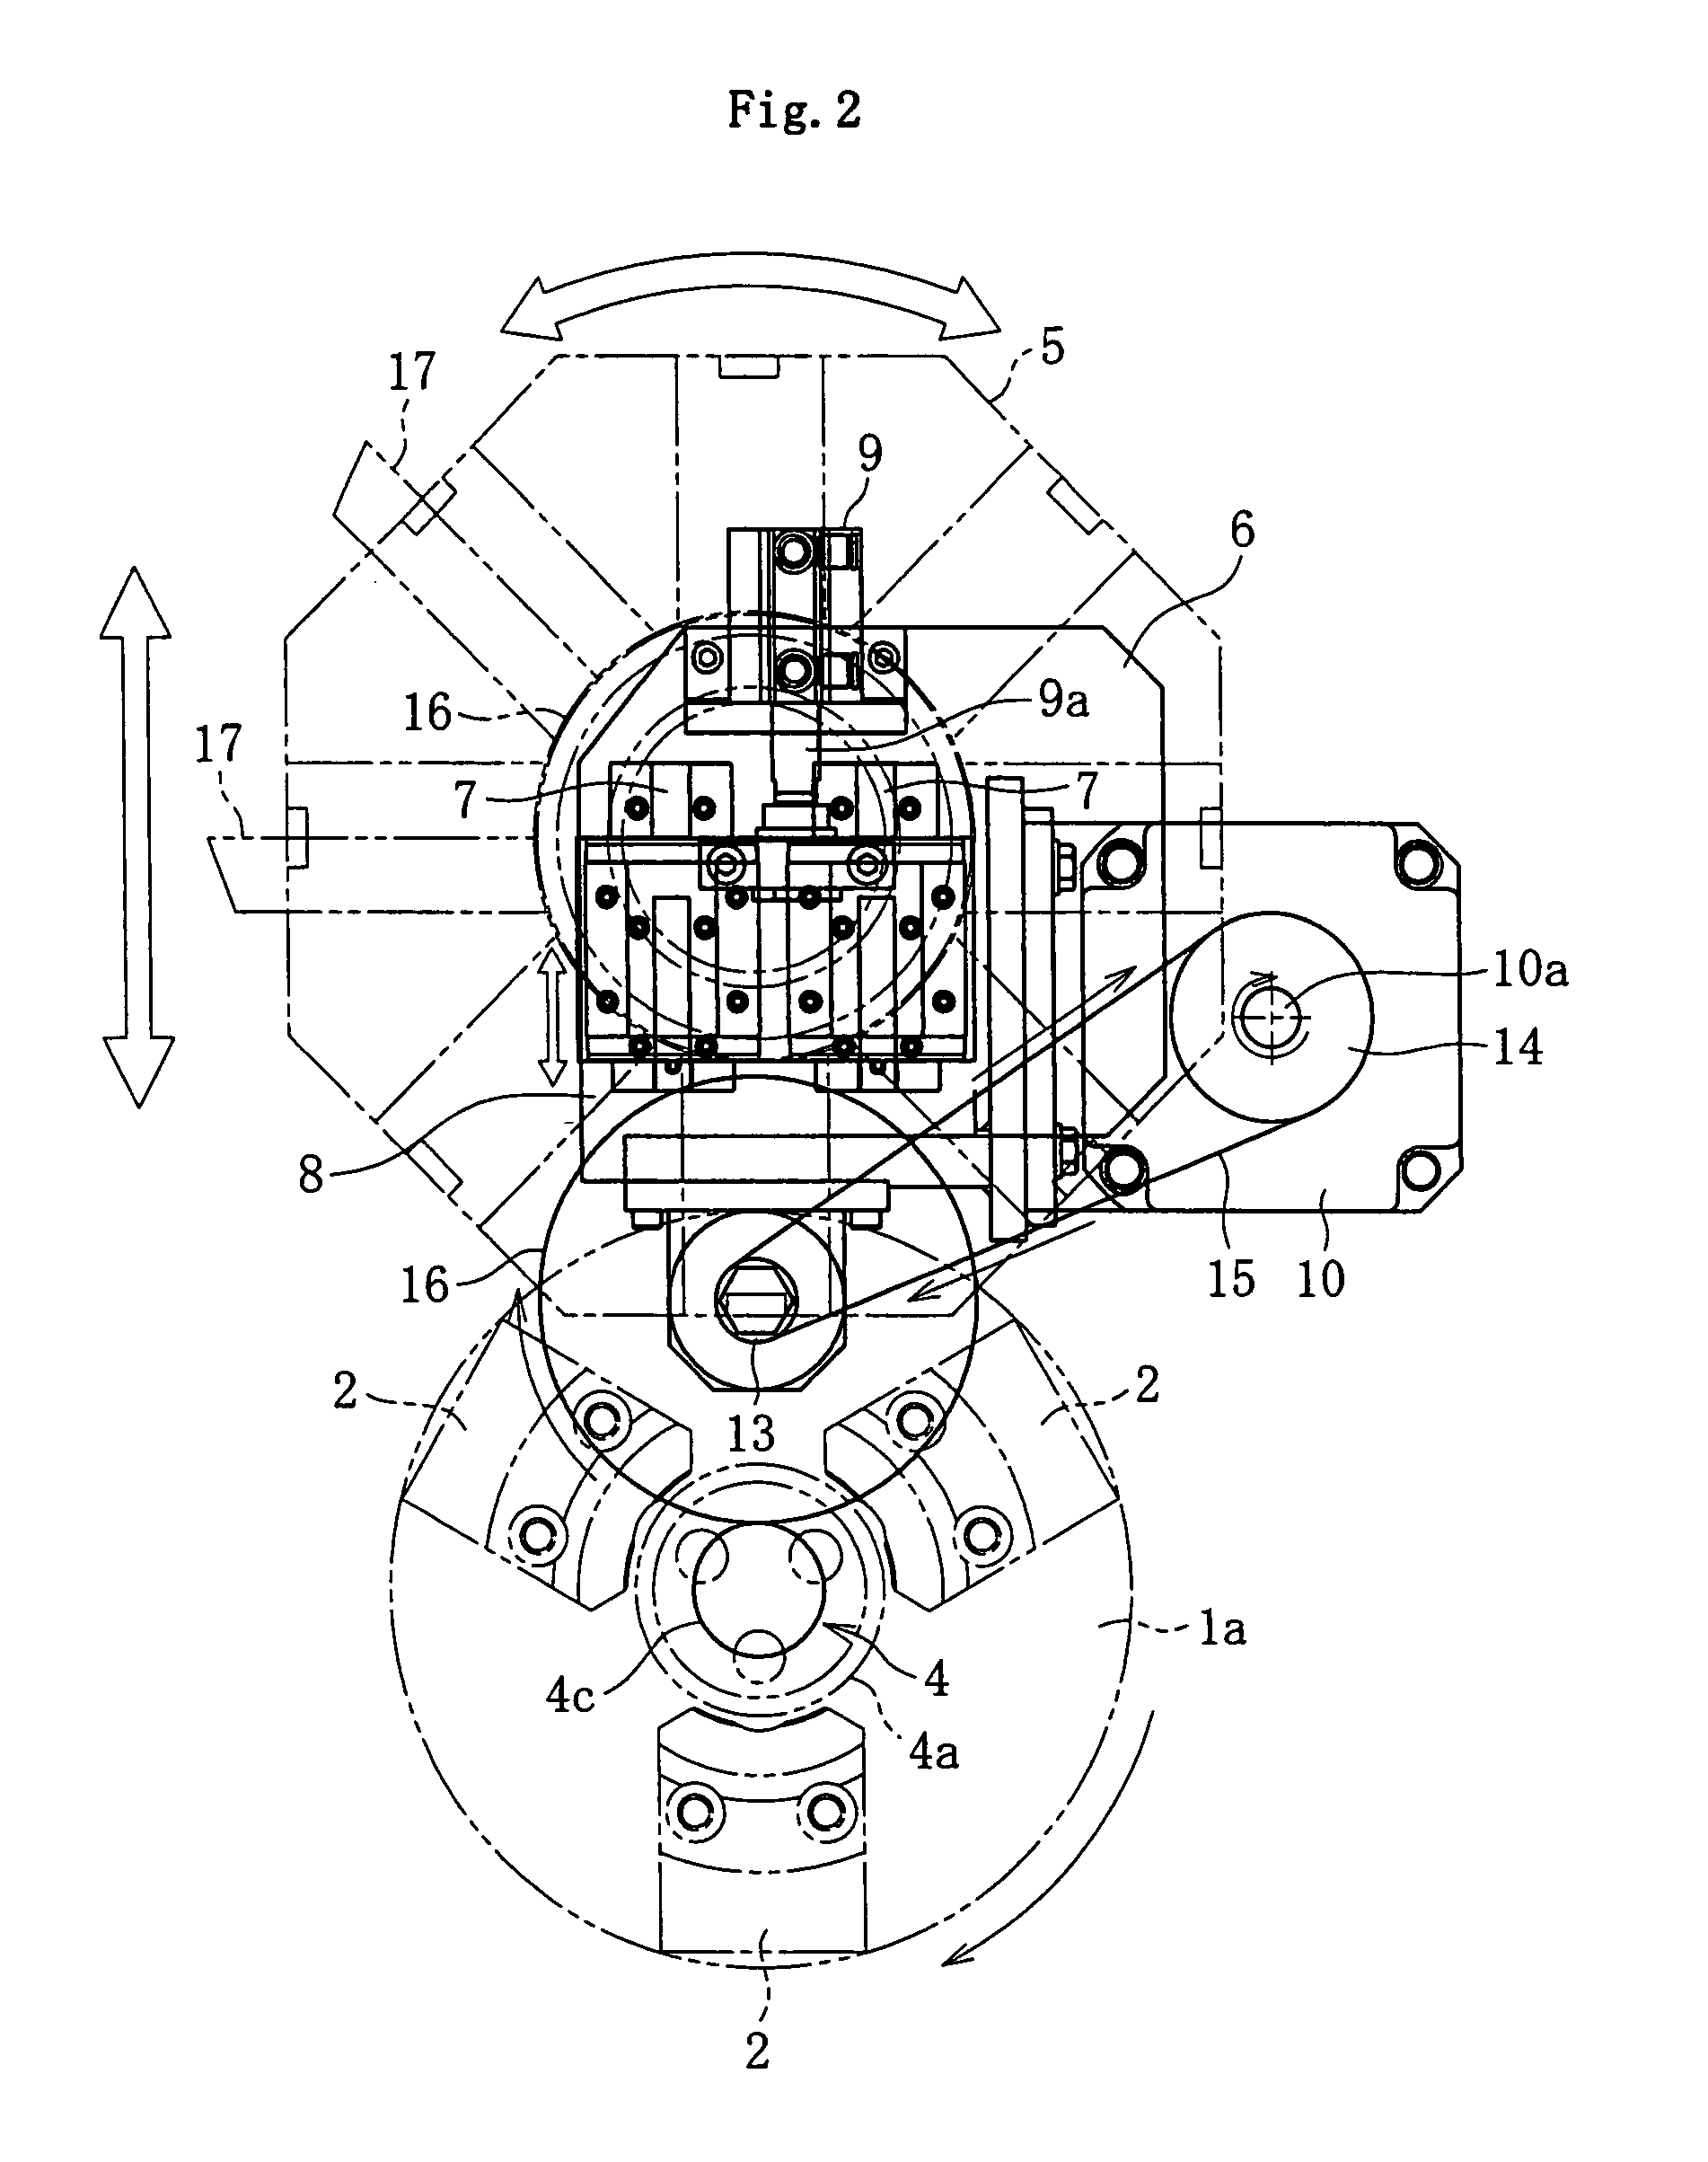 Method and apparatus for grinding axial workpieces